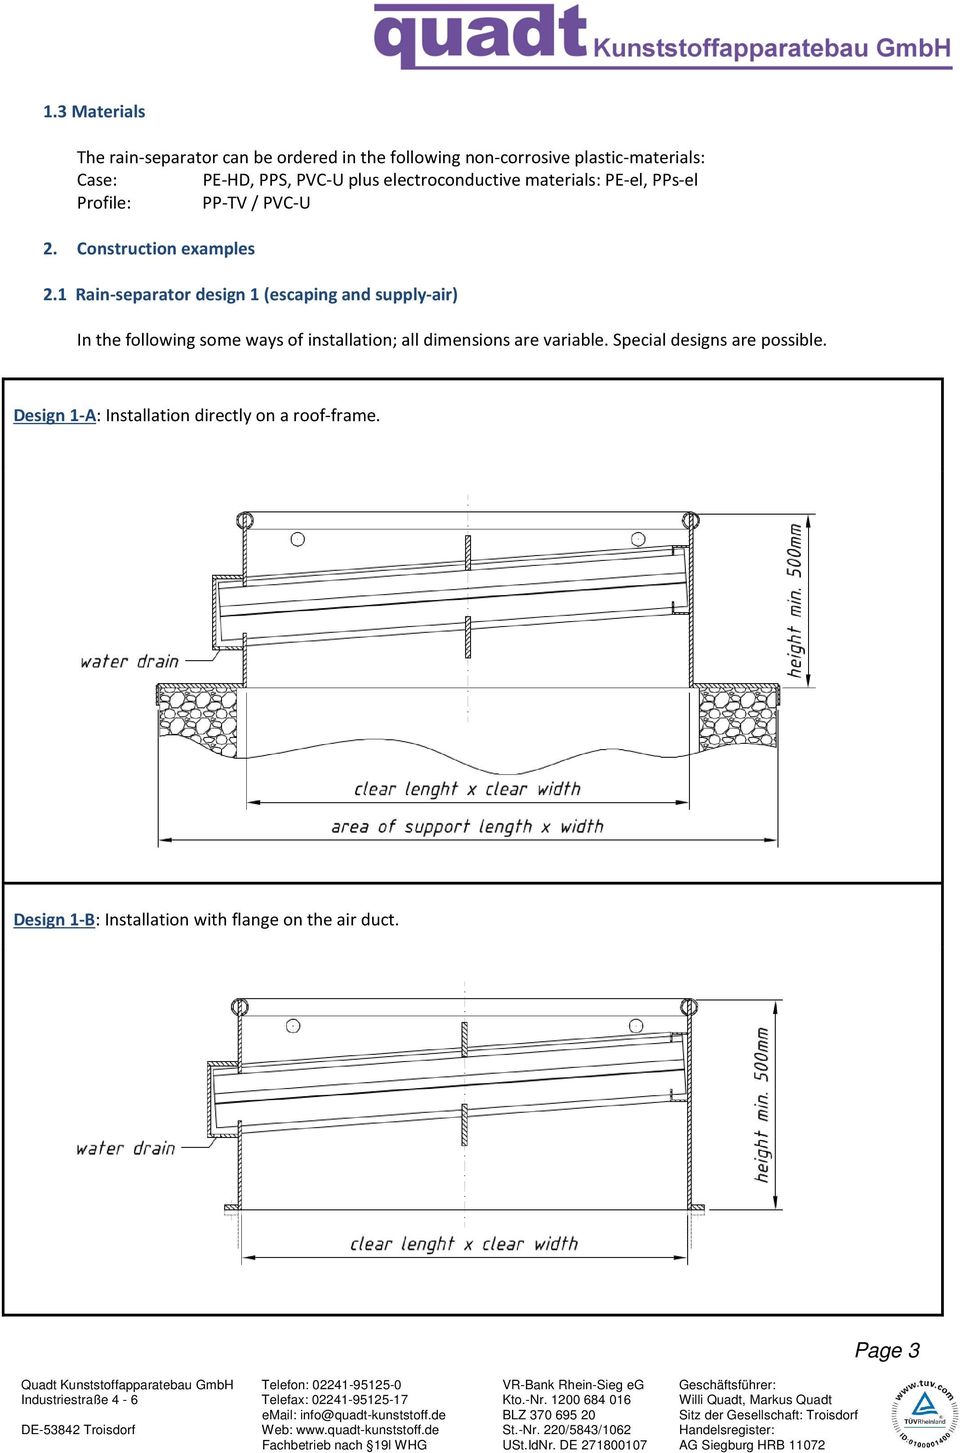 1 Rain-separator design 1 (escaping and supply-air) In the following some ways of installation; all dimensions are